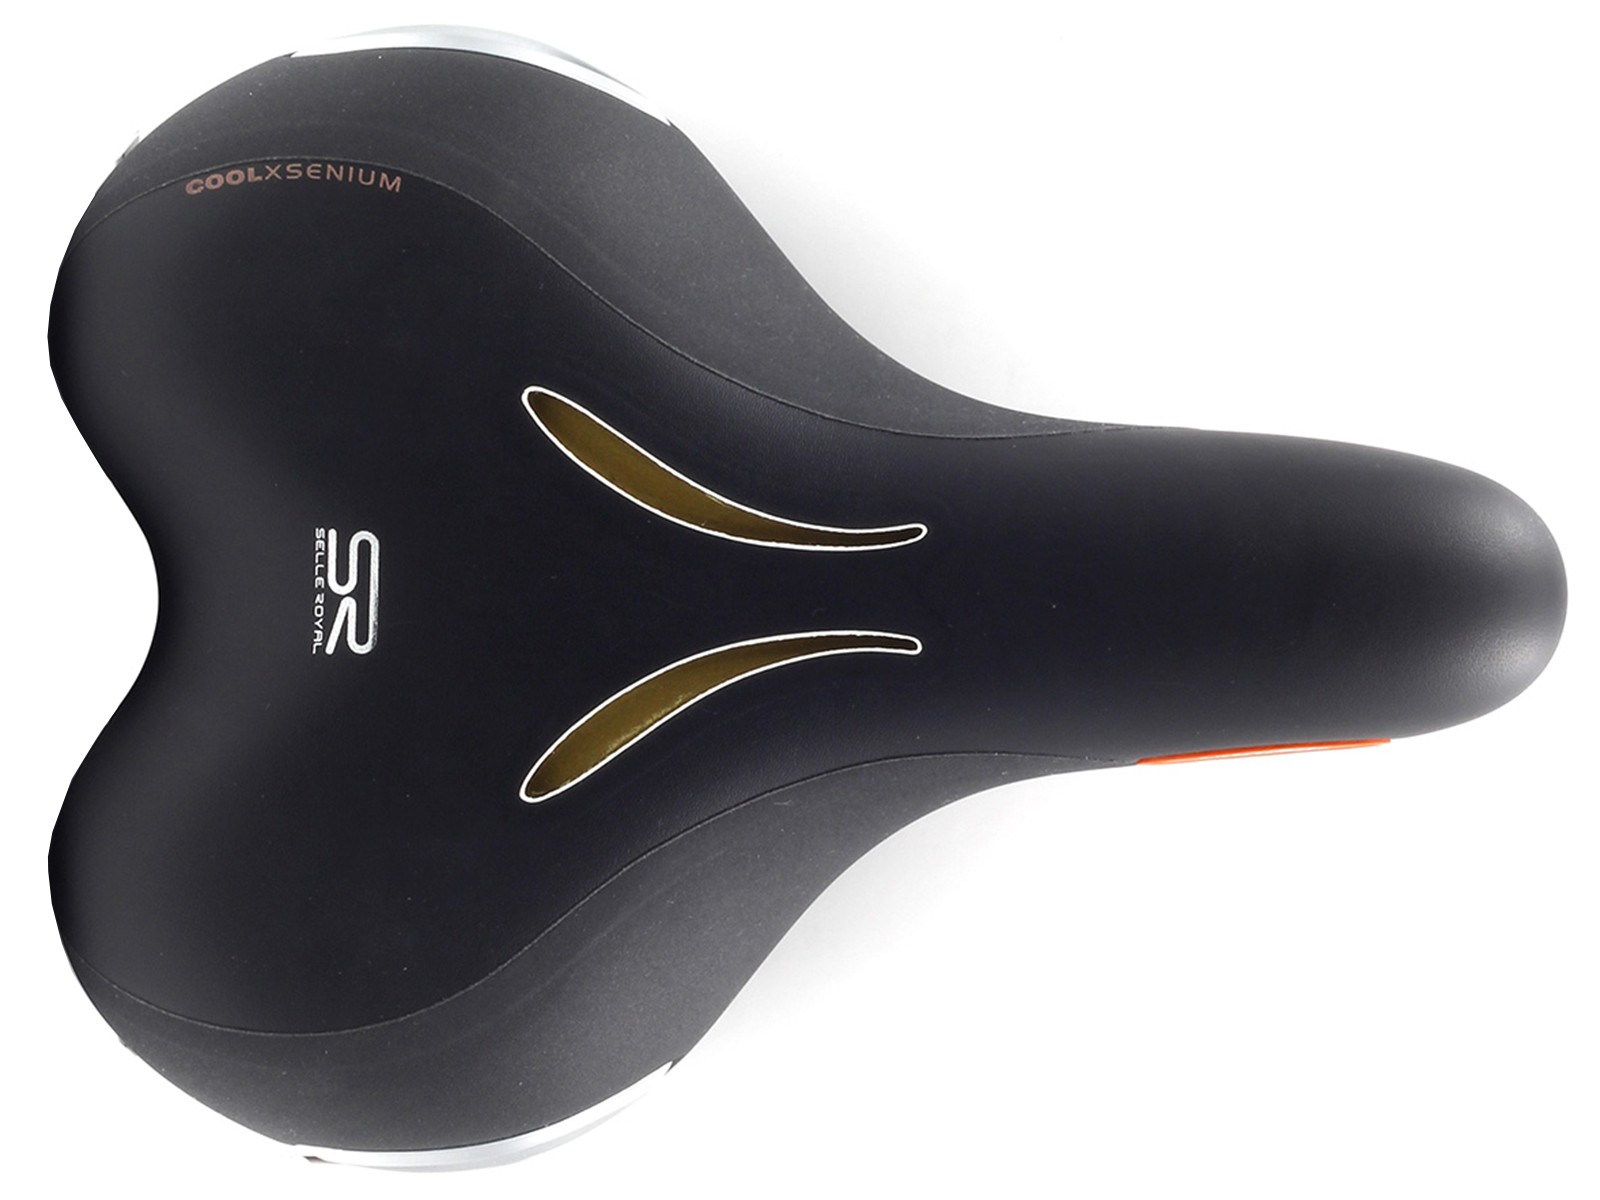 198mm Lookin Moderate saddle lady SELLE ROYAL